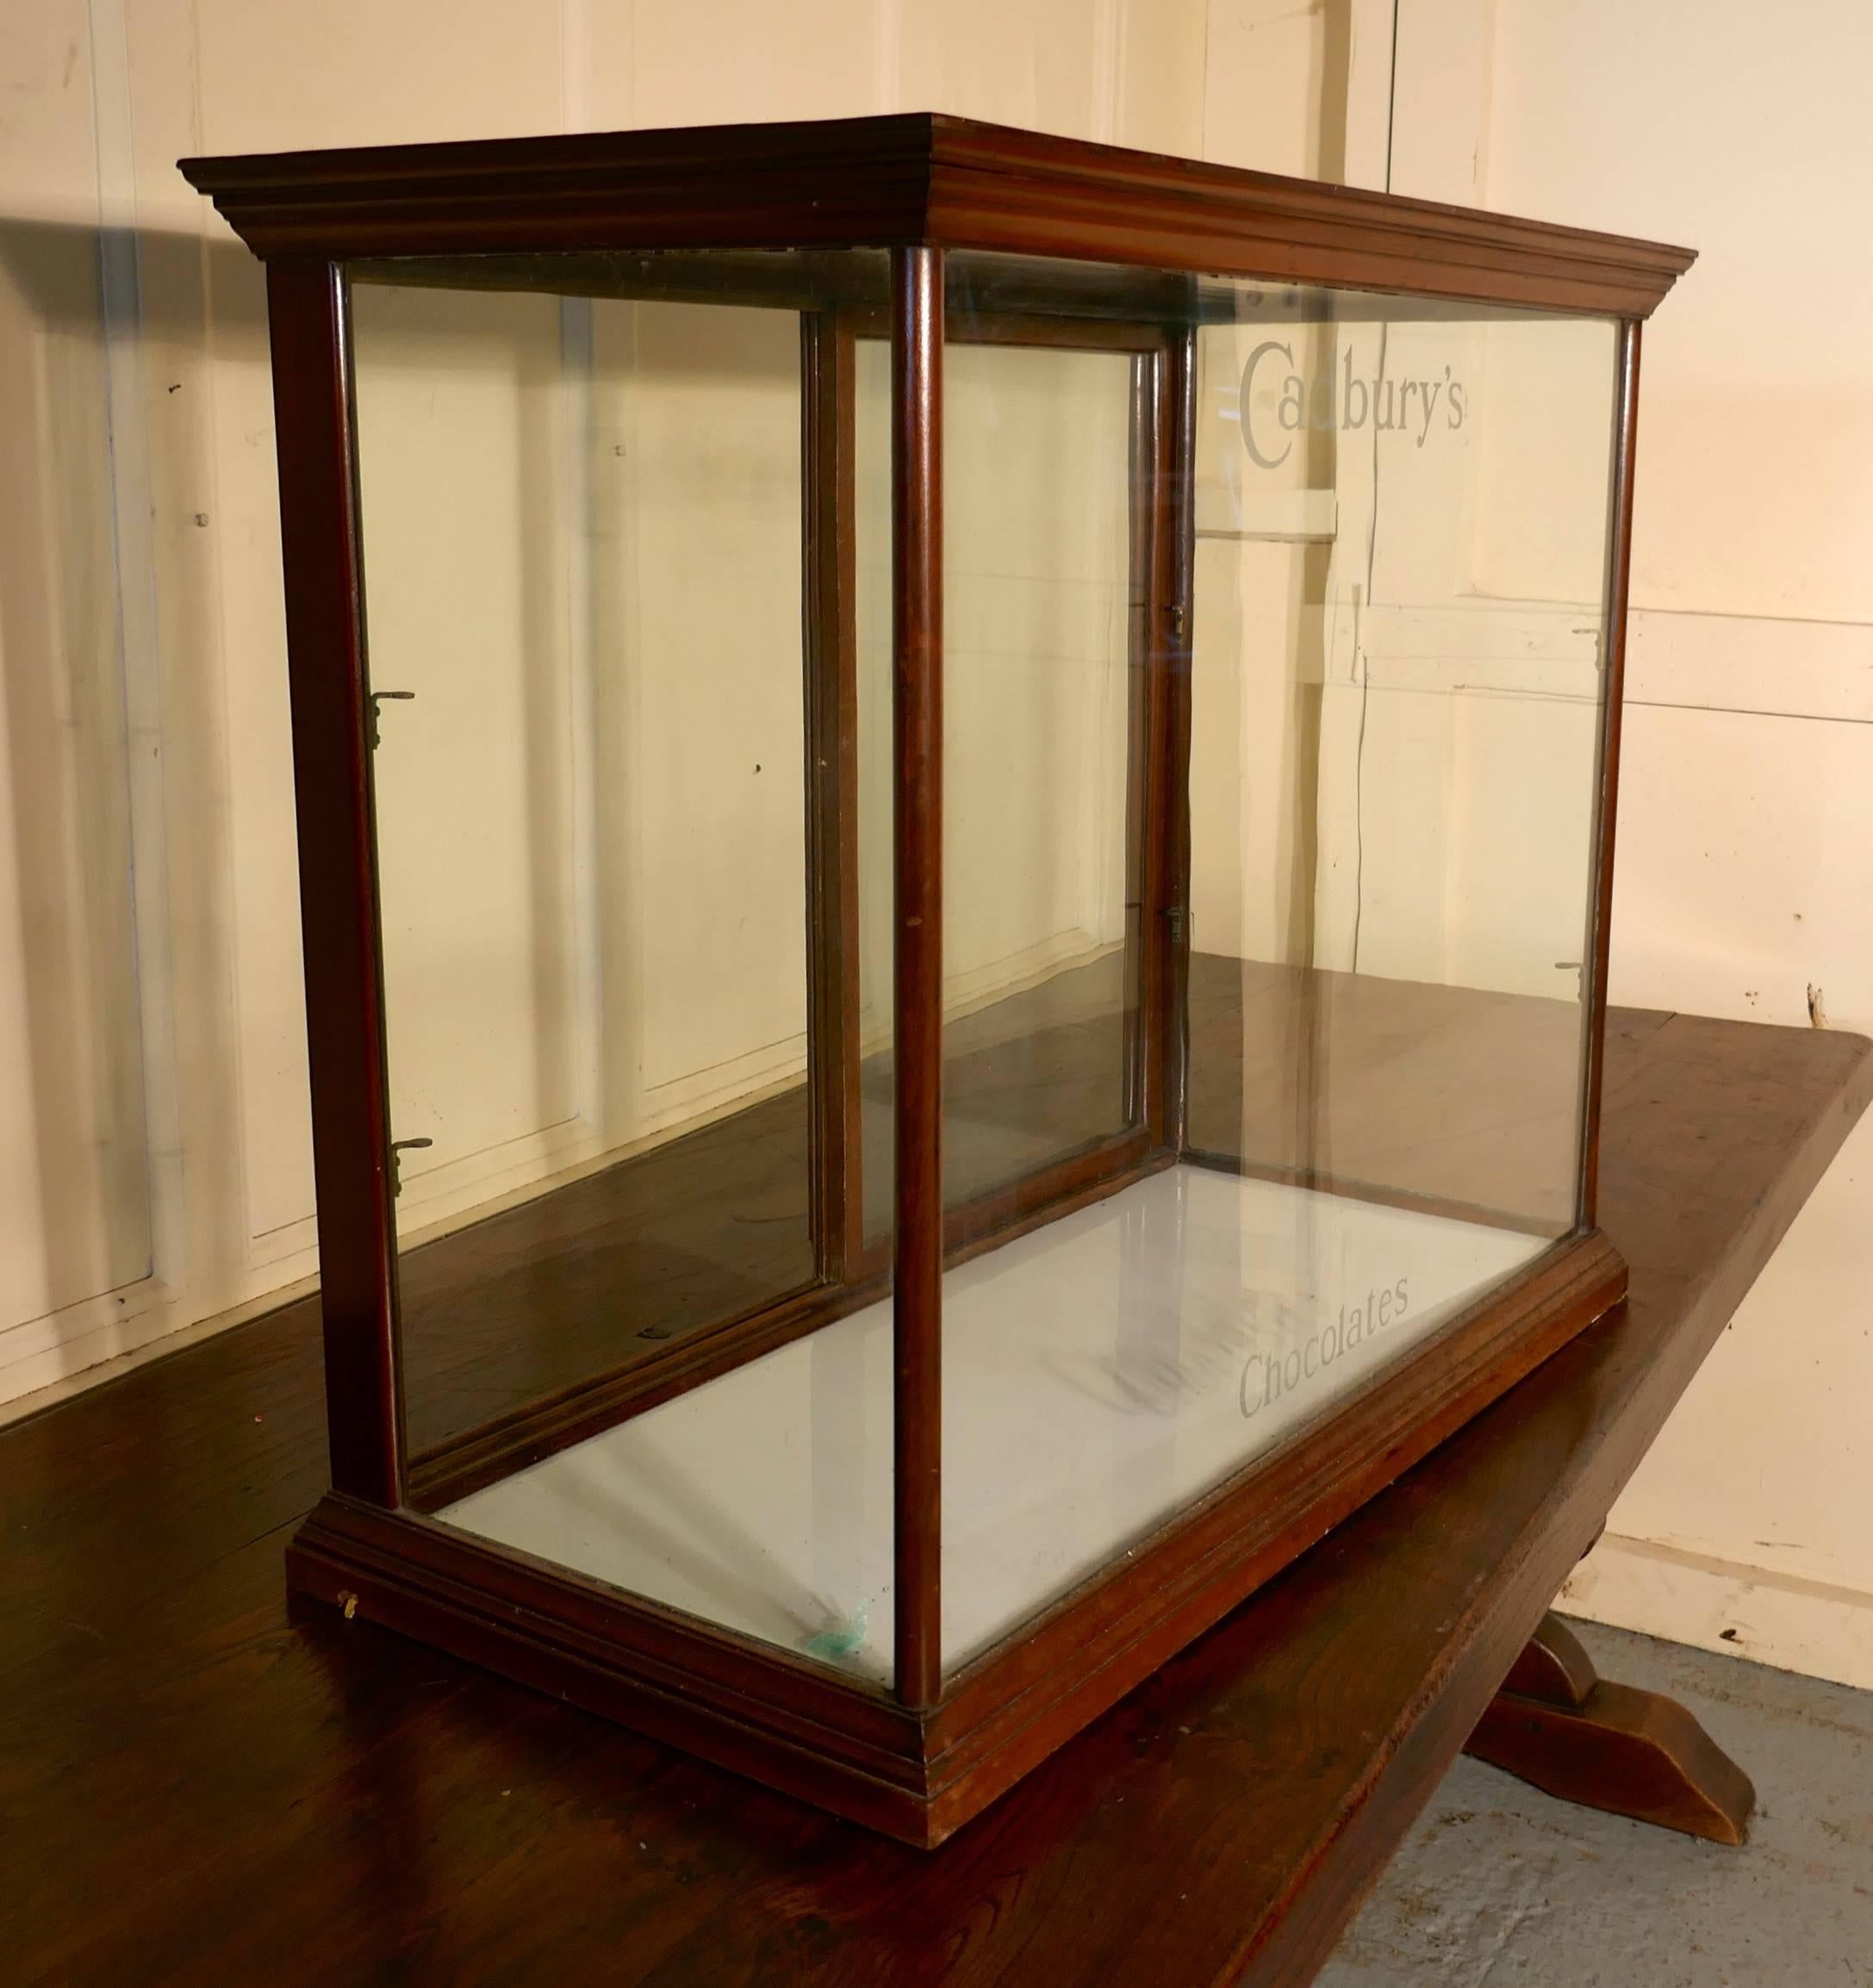  Cadbury’s counter top sweet shop display cabinet 

This glazed shop display cabinet is made mahogany, the glass has etched lettering on the front of the cabinets saying Cadbury’s at the top and chocolates at the bottom 

The cabinet has two sliding